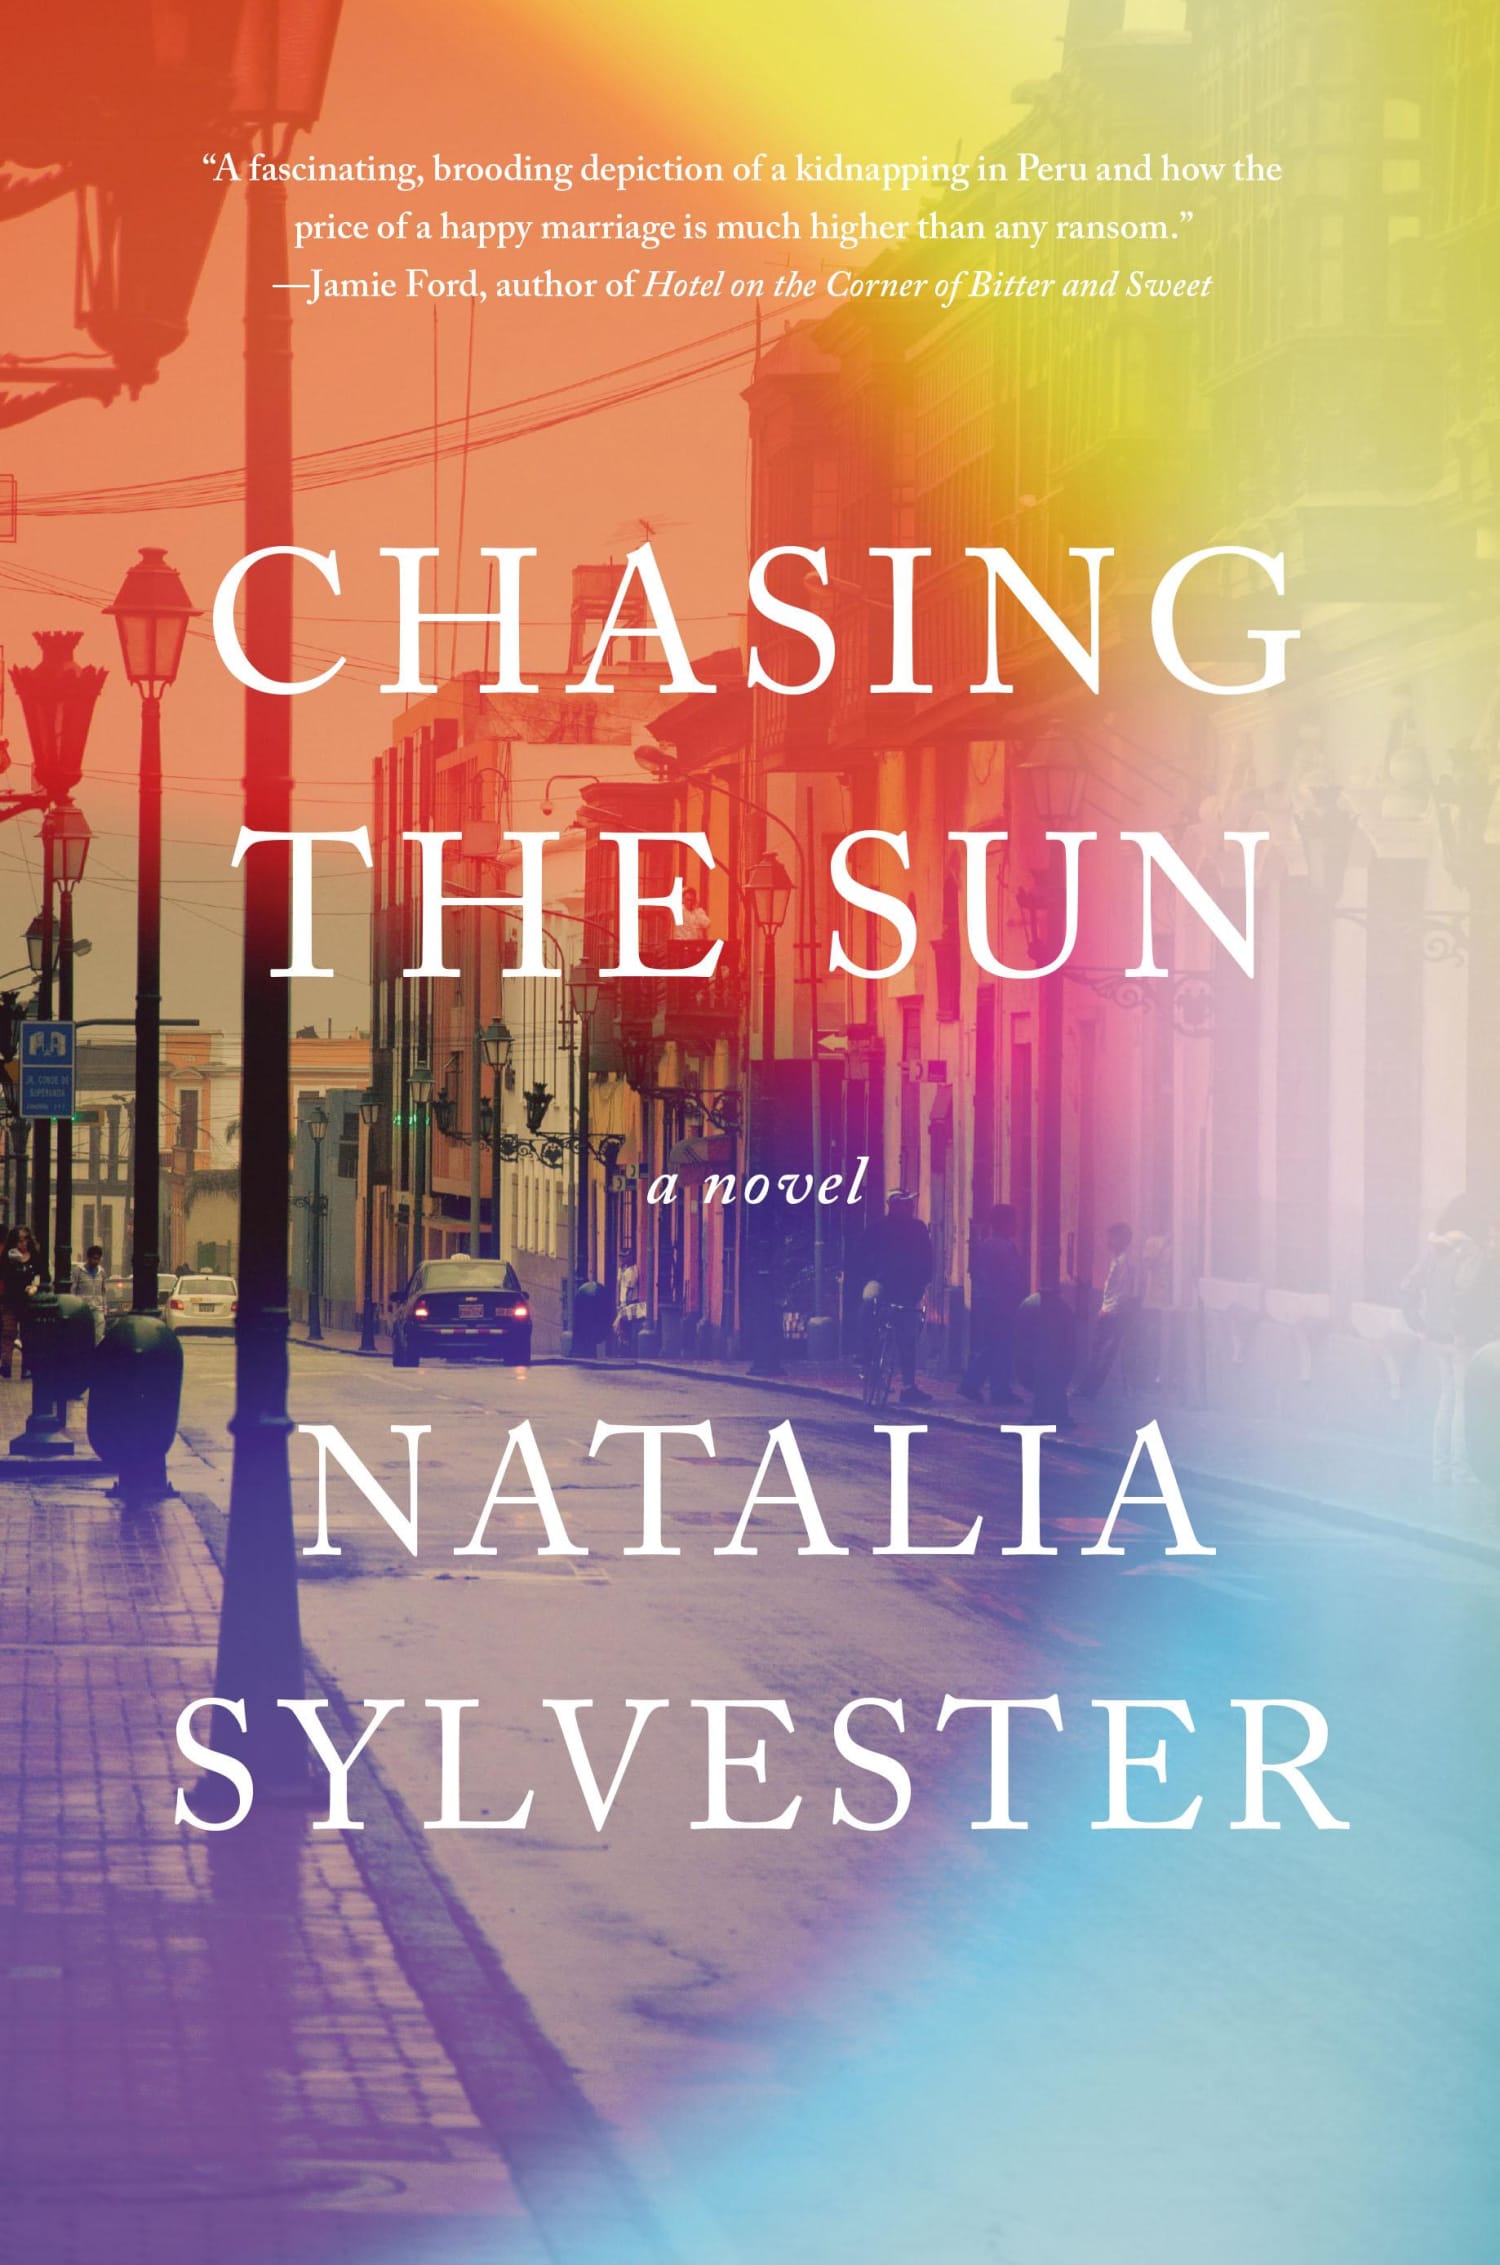 'Chasing the Sun' Novelist Influenced By Family Kidnapping in Peru